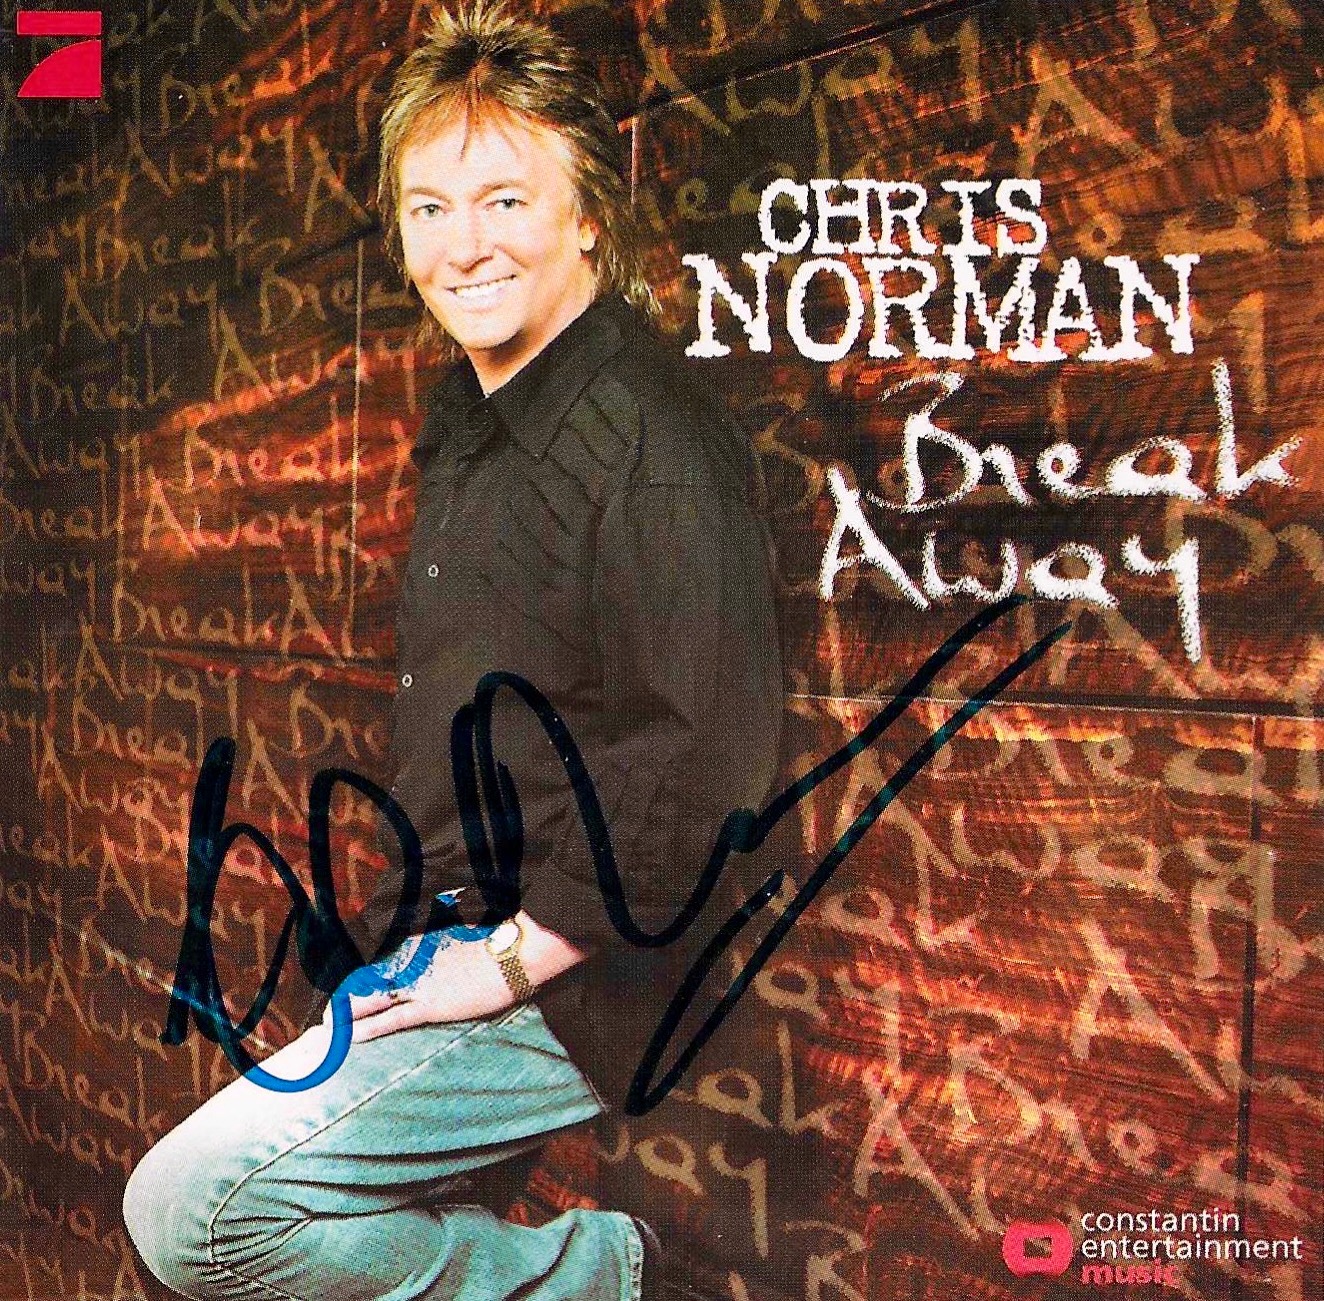 Chris Norman - Interview (Part 4) (One Acoustic Evening) - More